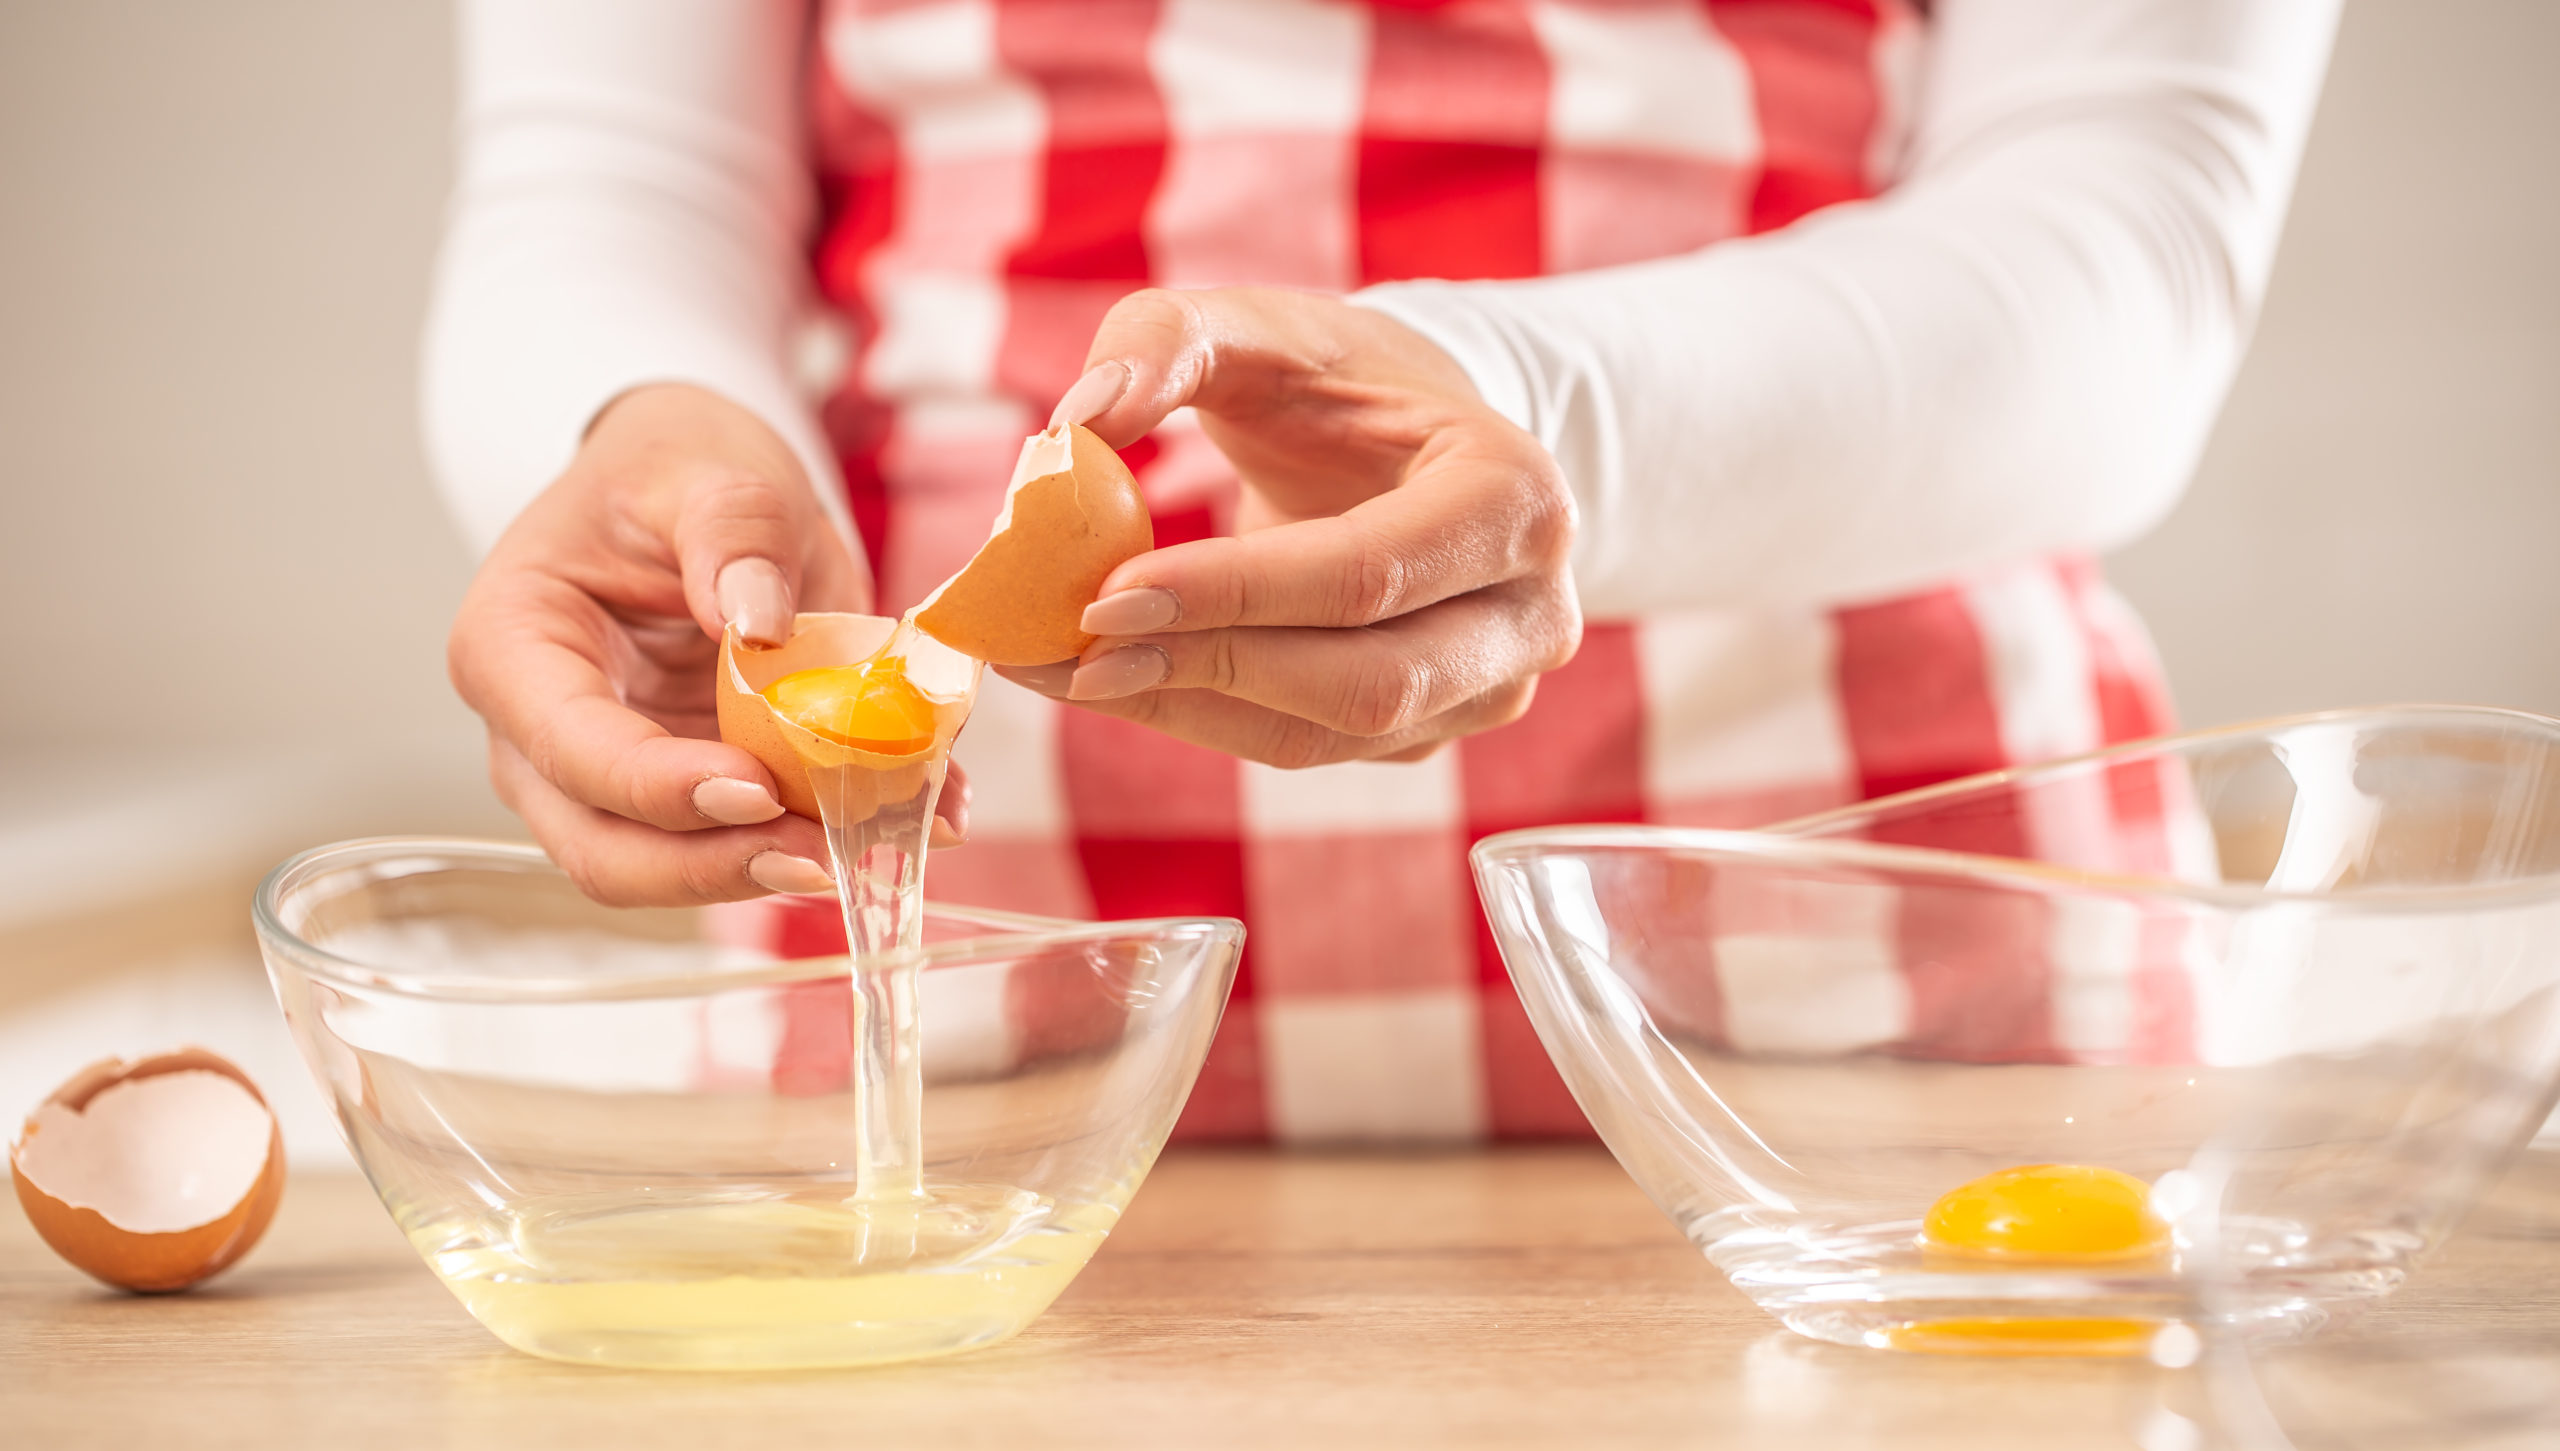 Detail,Of,Woman's,Hands,Separating,Egg,Yolks,From,The,Whites